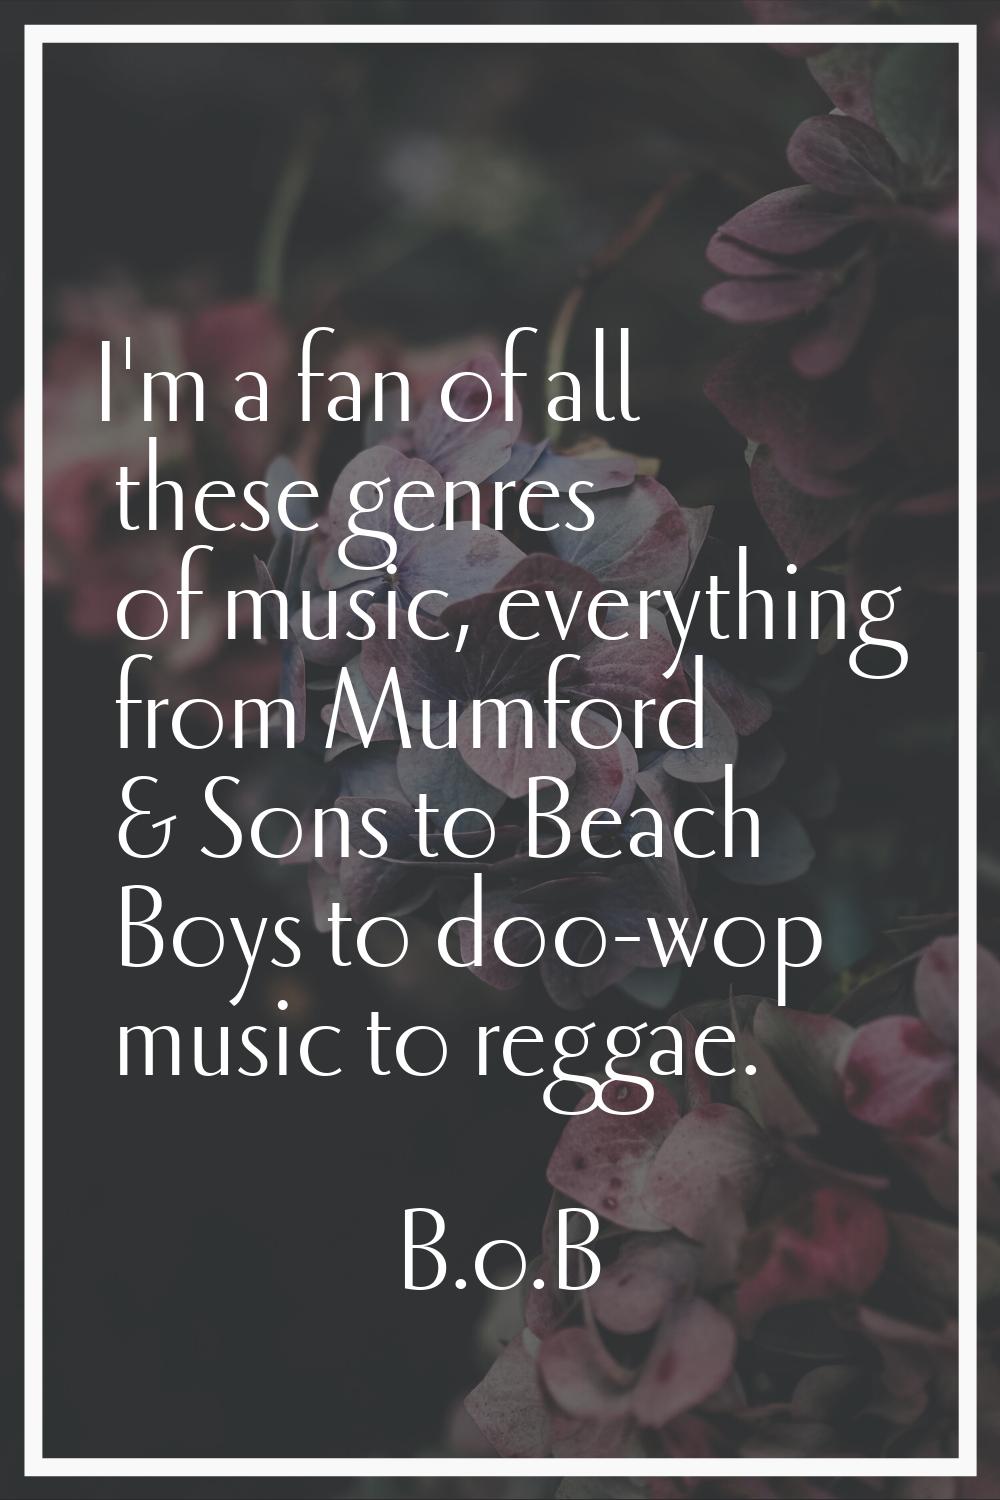 I'm a fan of all these genres of music, everything from Mumford & Sons to Beach Boys to doo-wop mus